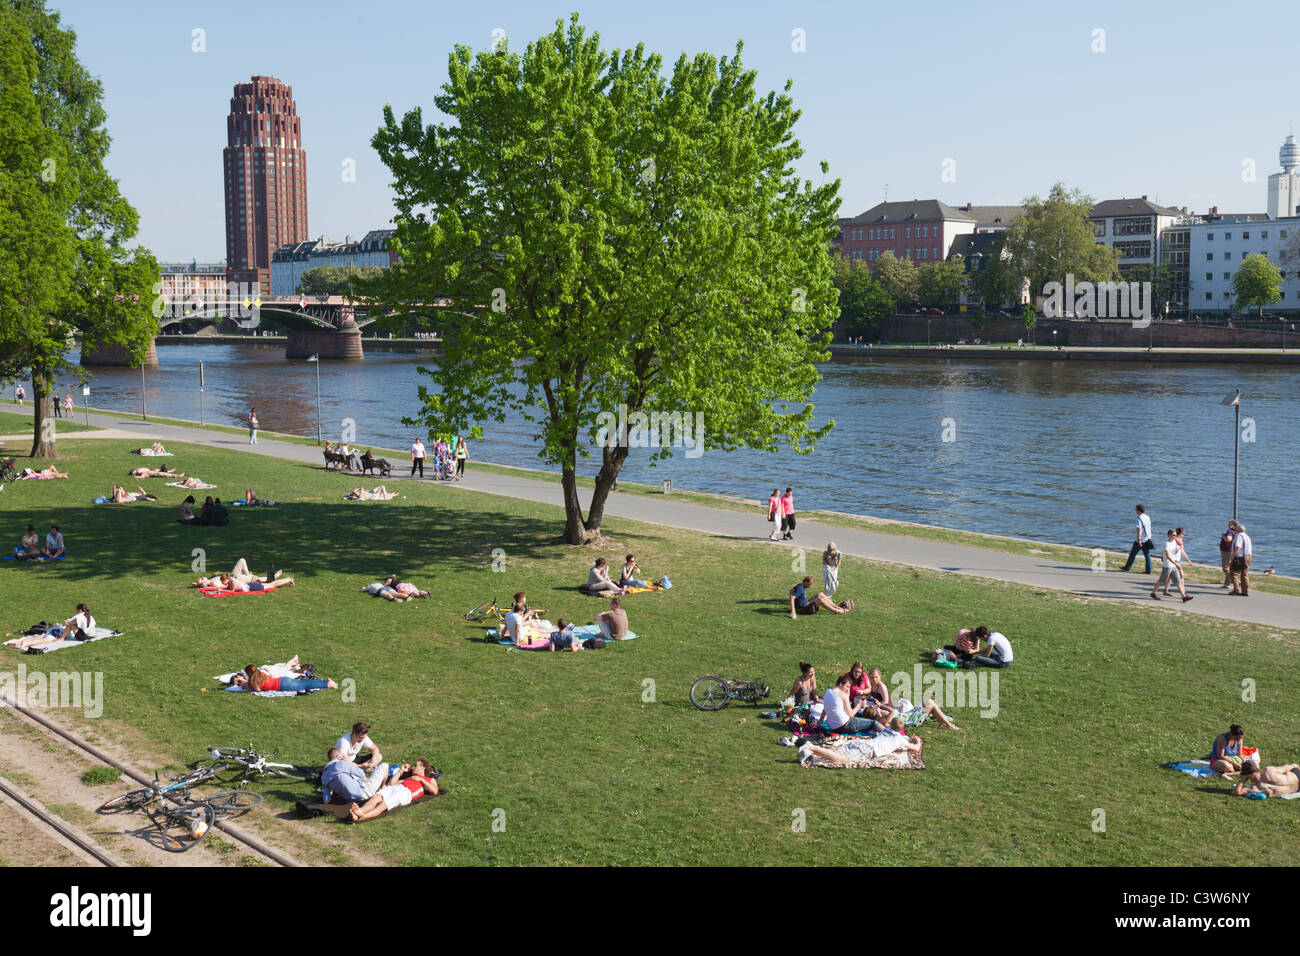 People relaxing by the river Main in Frankfurt, Germany on a warm late Spring day. Stock Photo